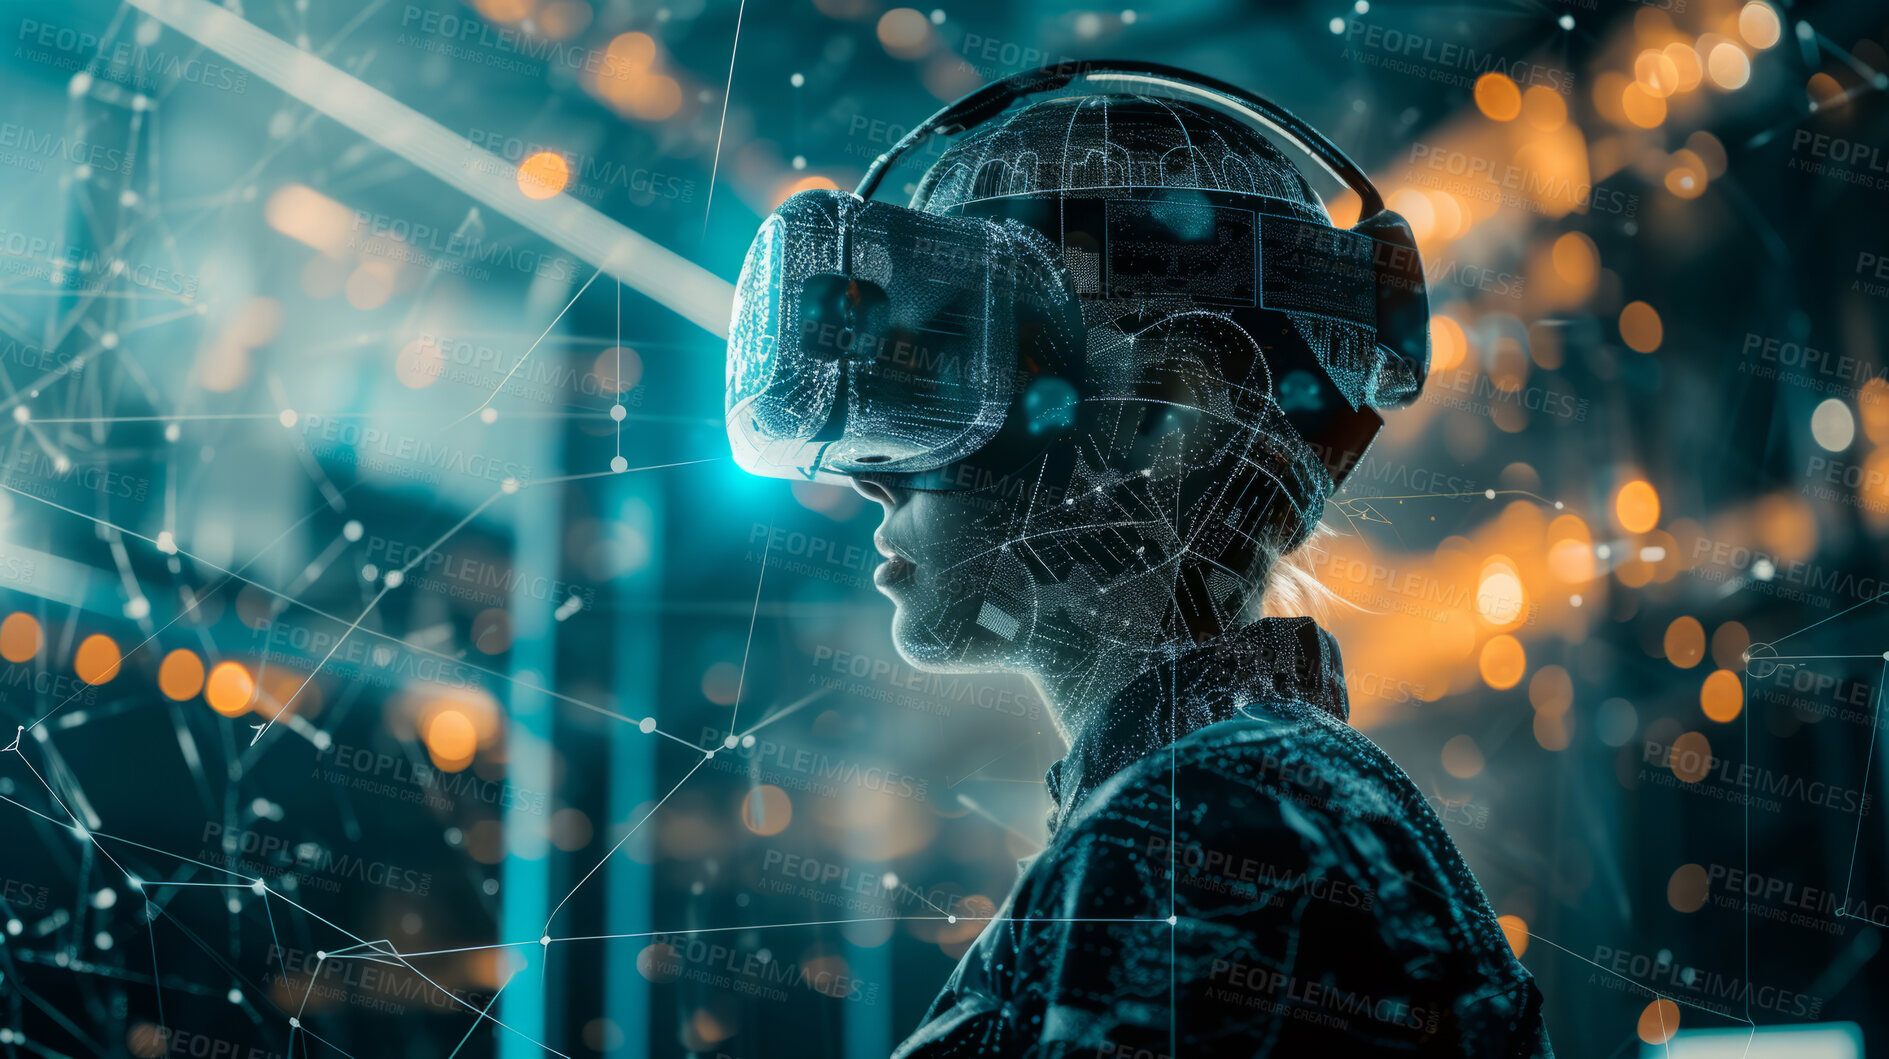 Buy stock photo Virtual reality, programming and fun experiences for tech fans. Mixing programming with VR tech for exciting digital worlds. Dive into the future of tech innovation.